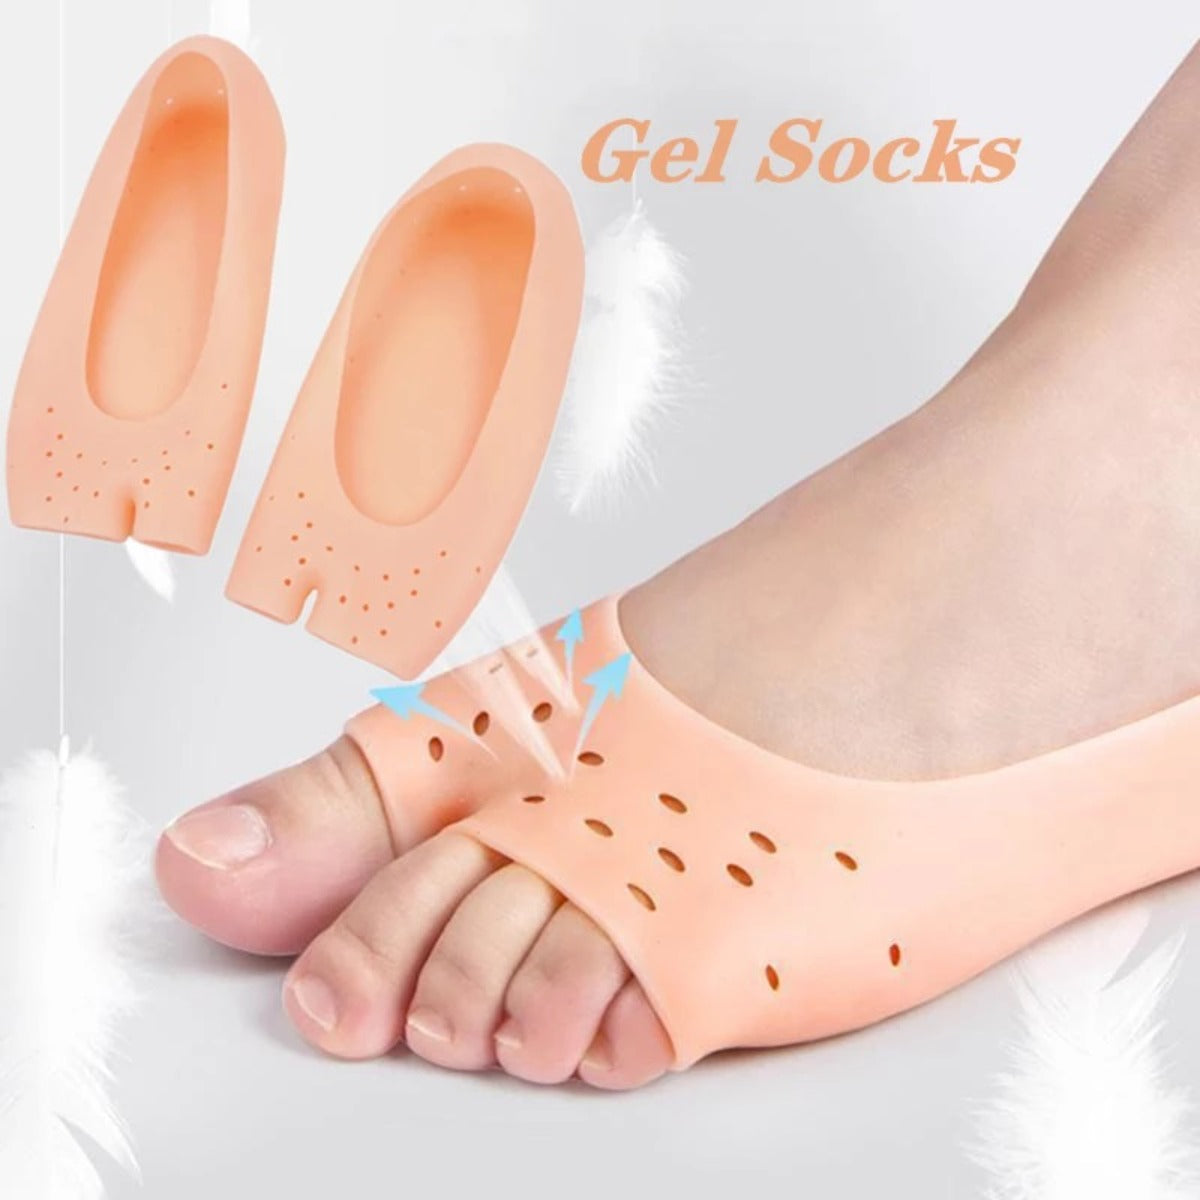 Soft Silicone Moisturizing Gel Socks For Foot Care Protector